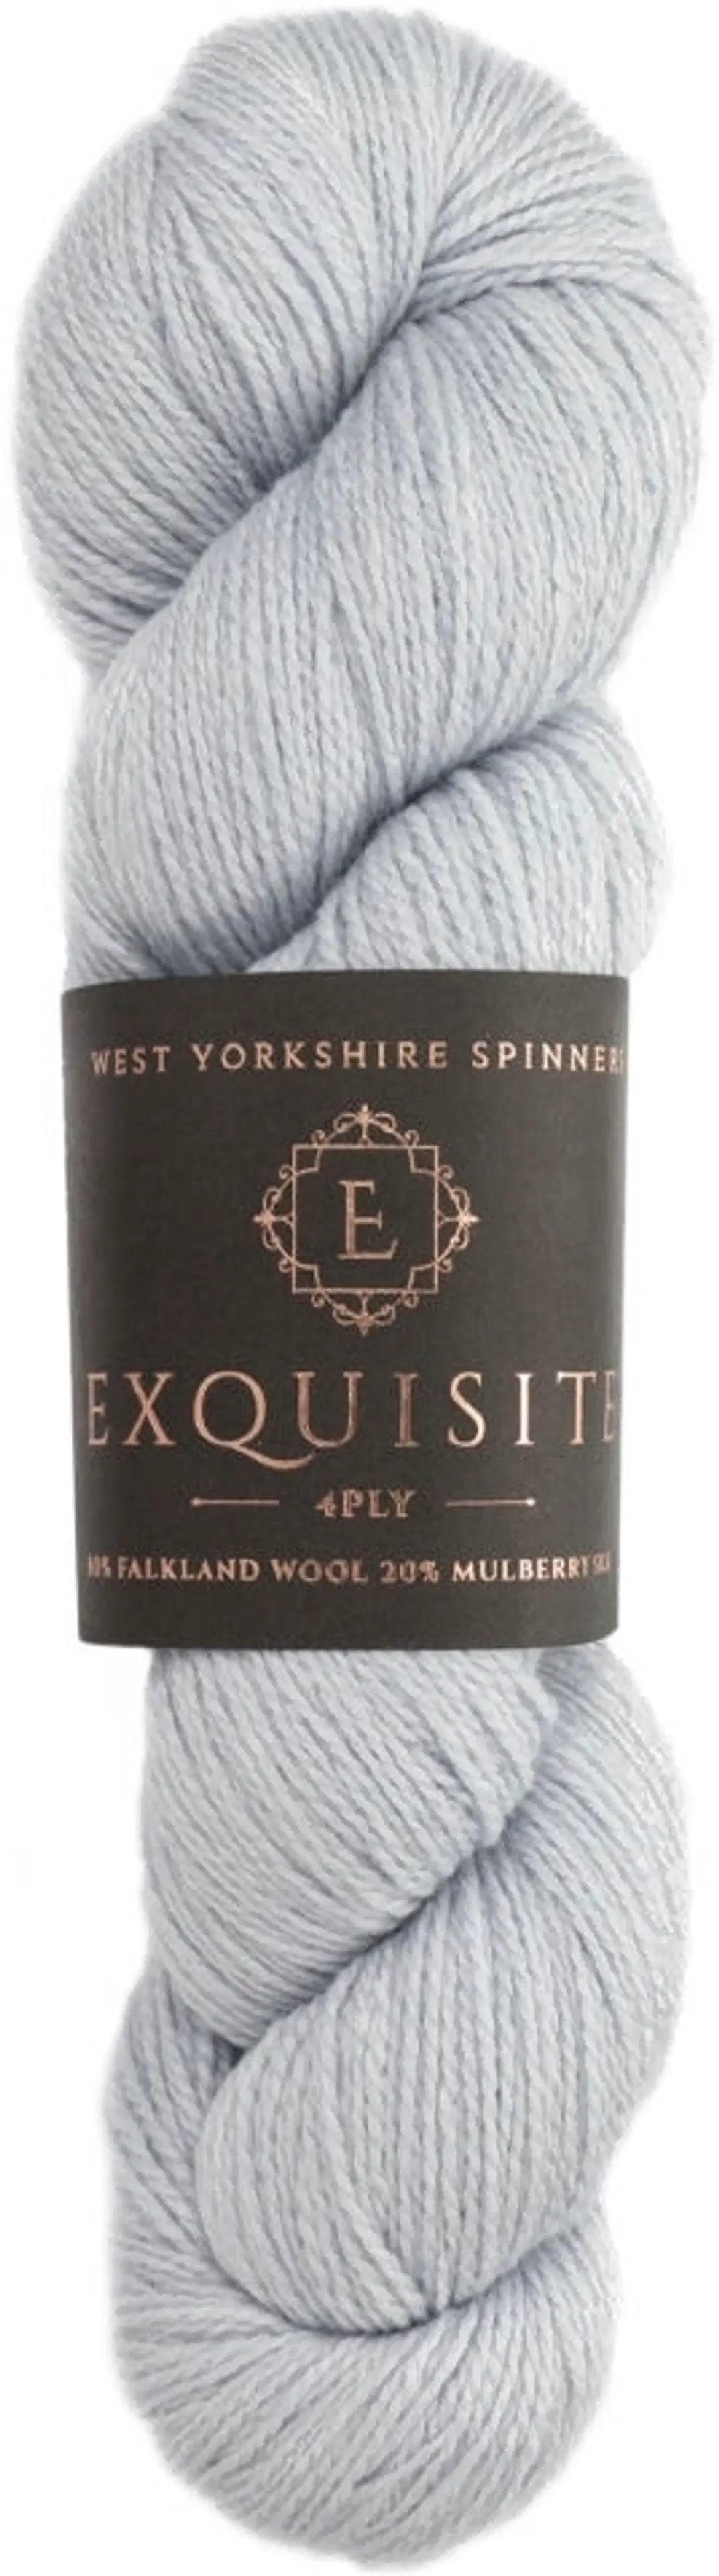 West Yorkshire Spinners lanka Exquisite 4PLY 100g Knightsbridge 148